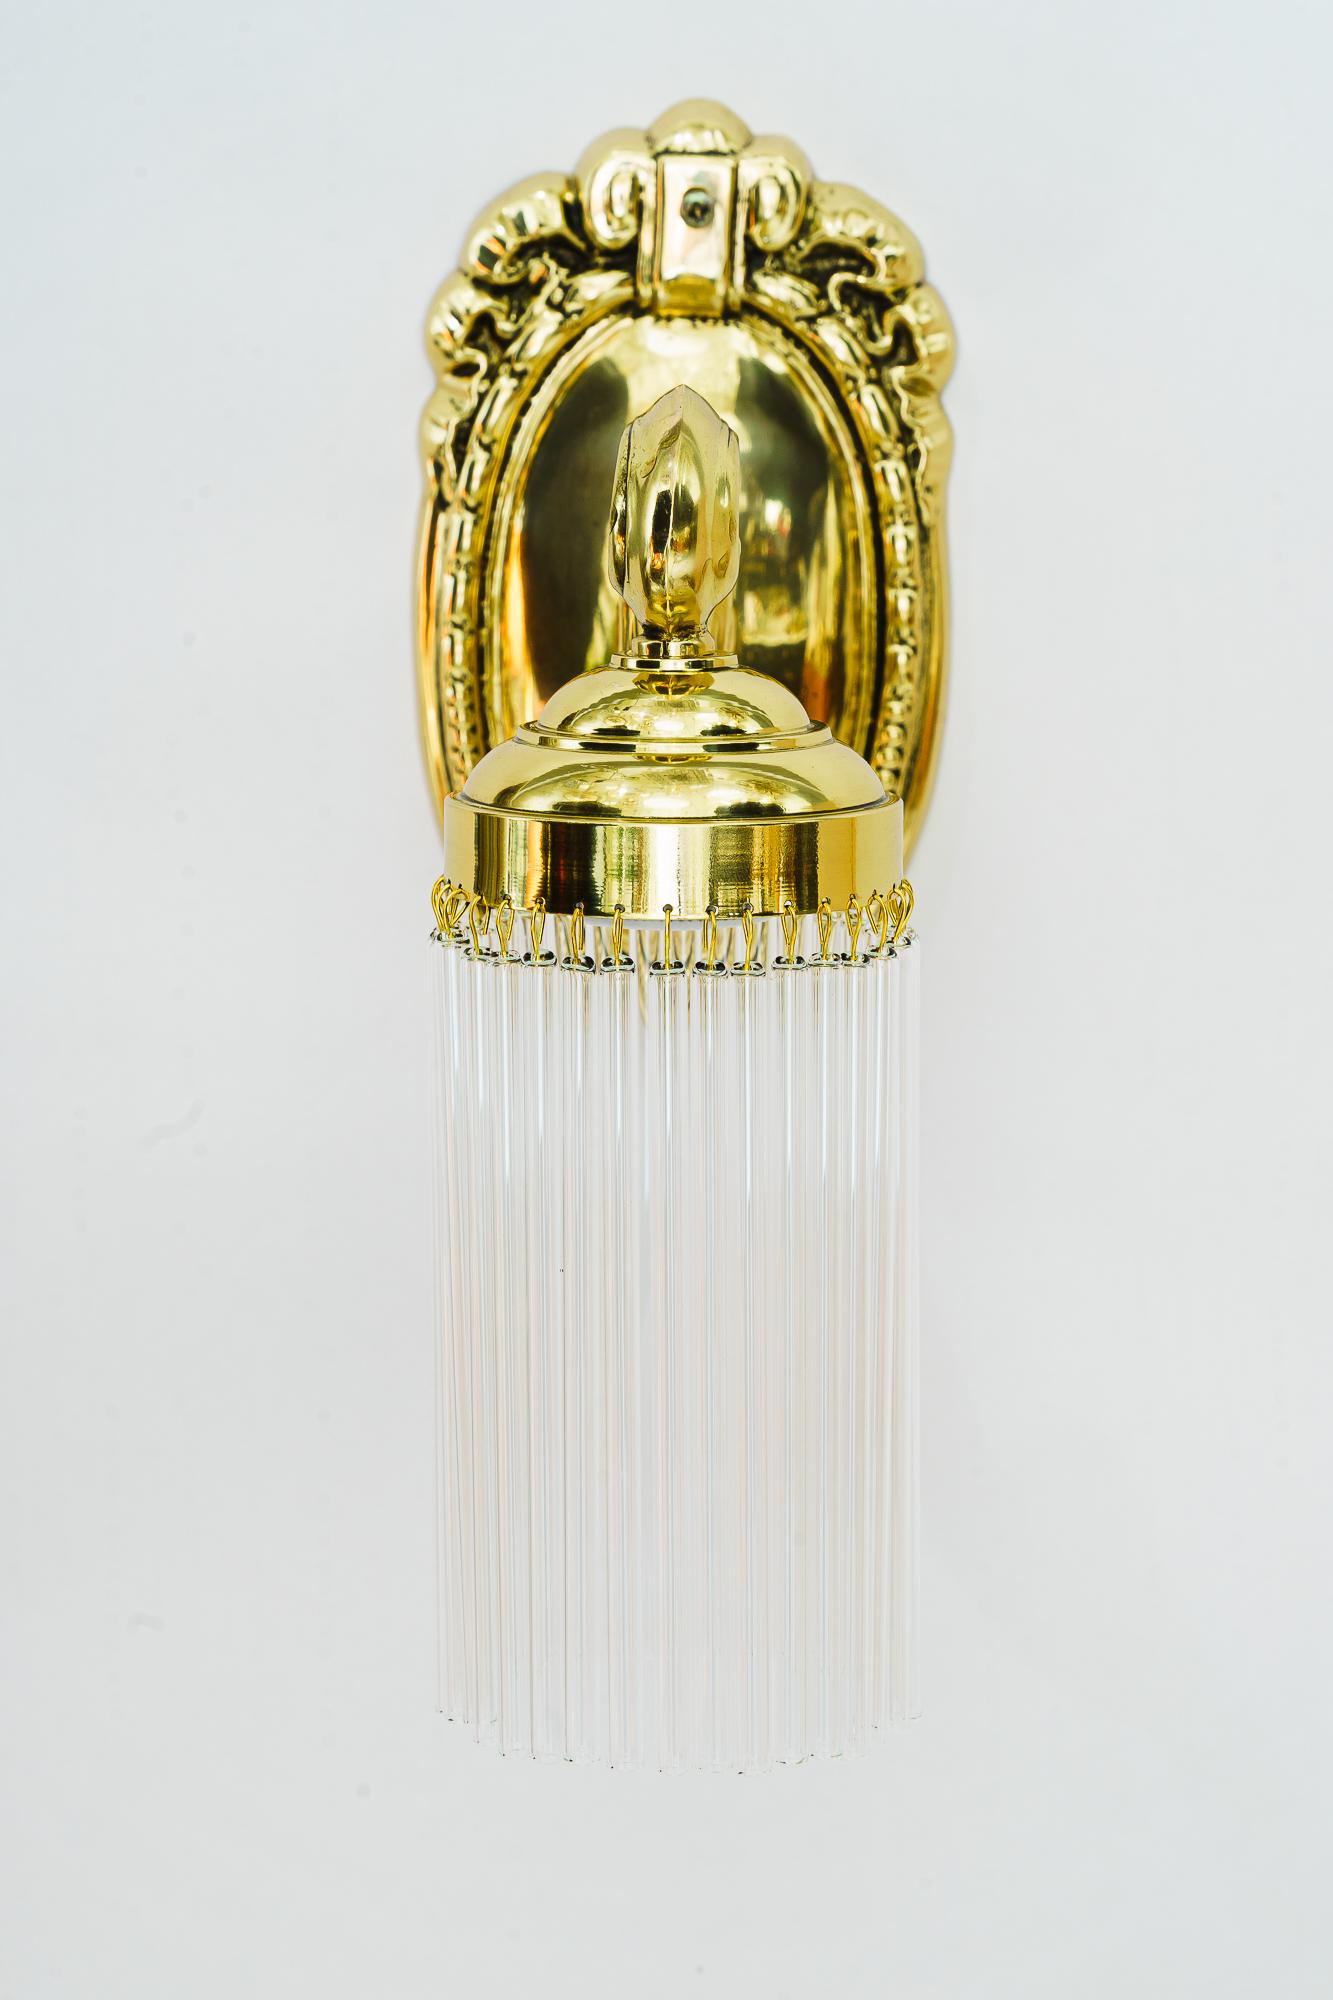 2 Historistic wall lamps vienna around 1890s
Brass polished and stove enameled
The glass sticks are replaced ( new )